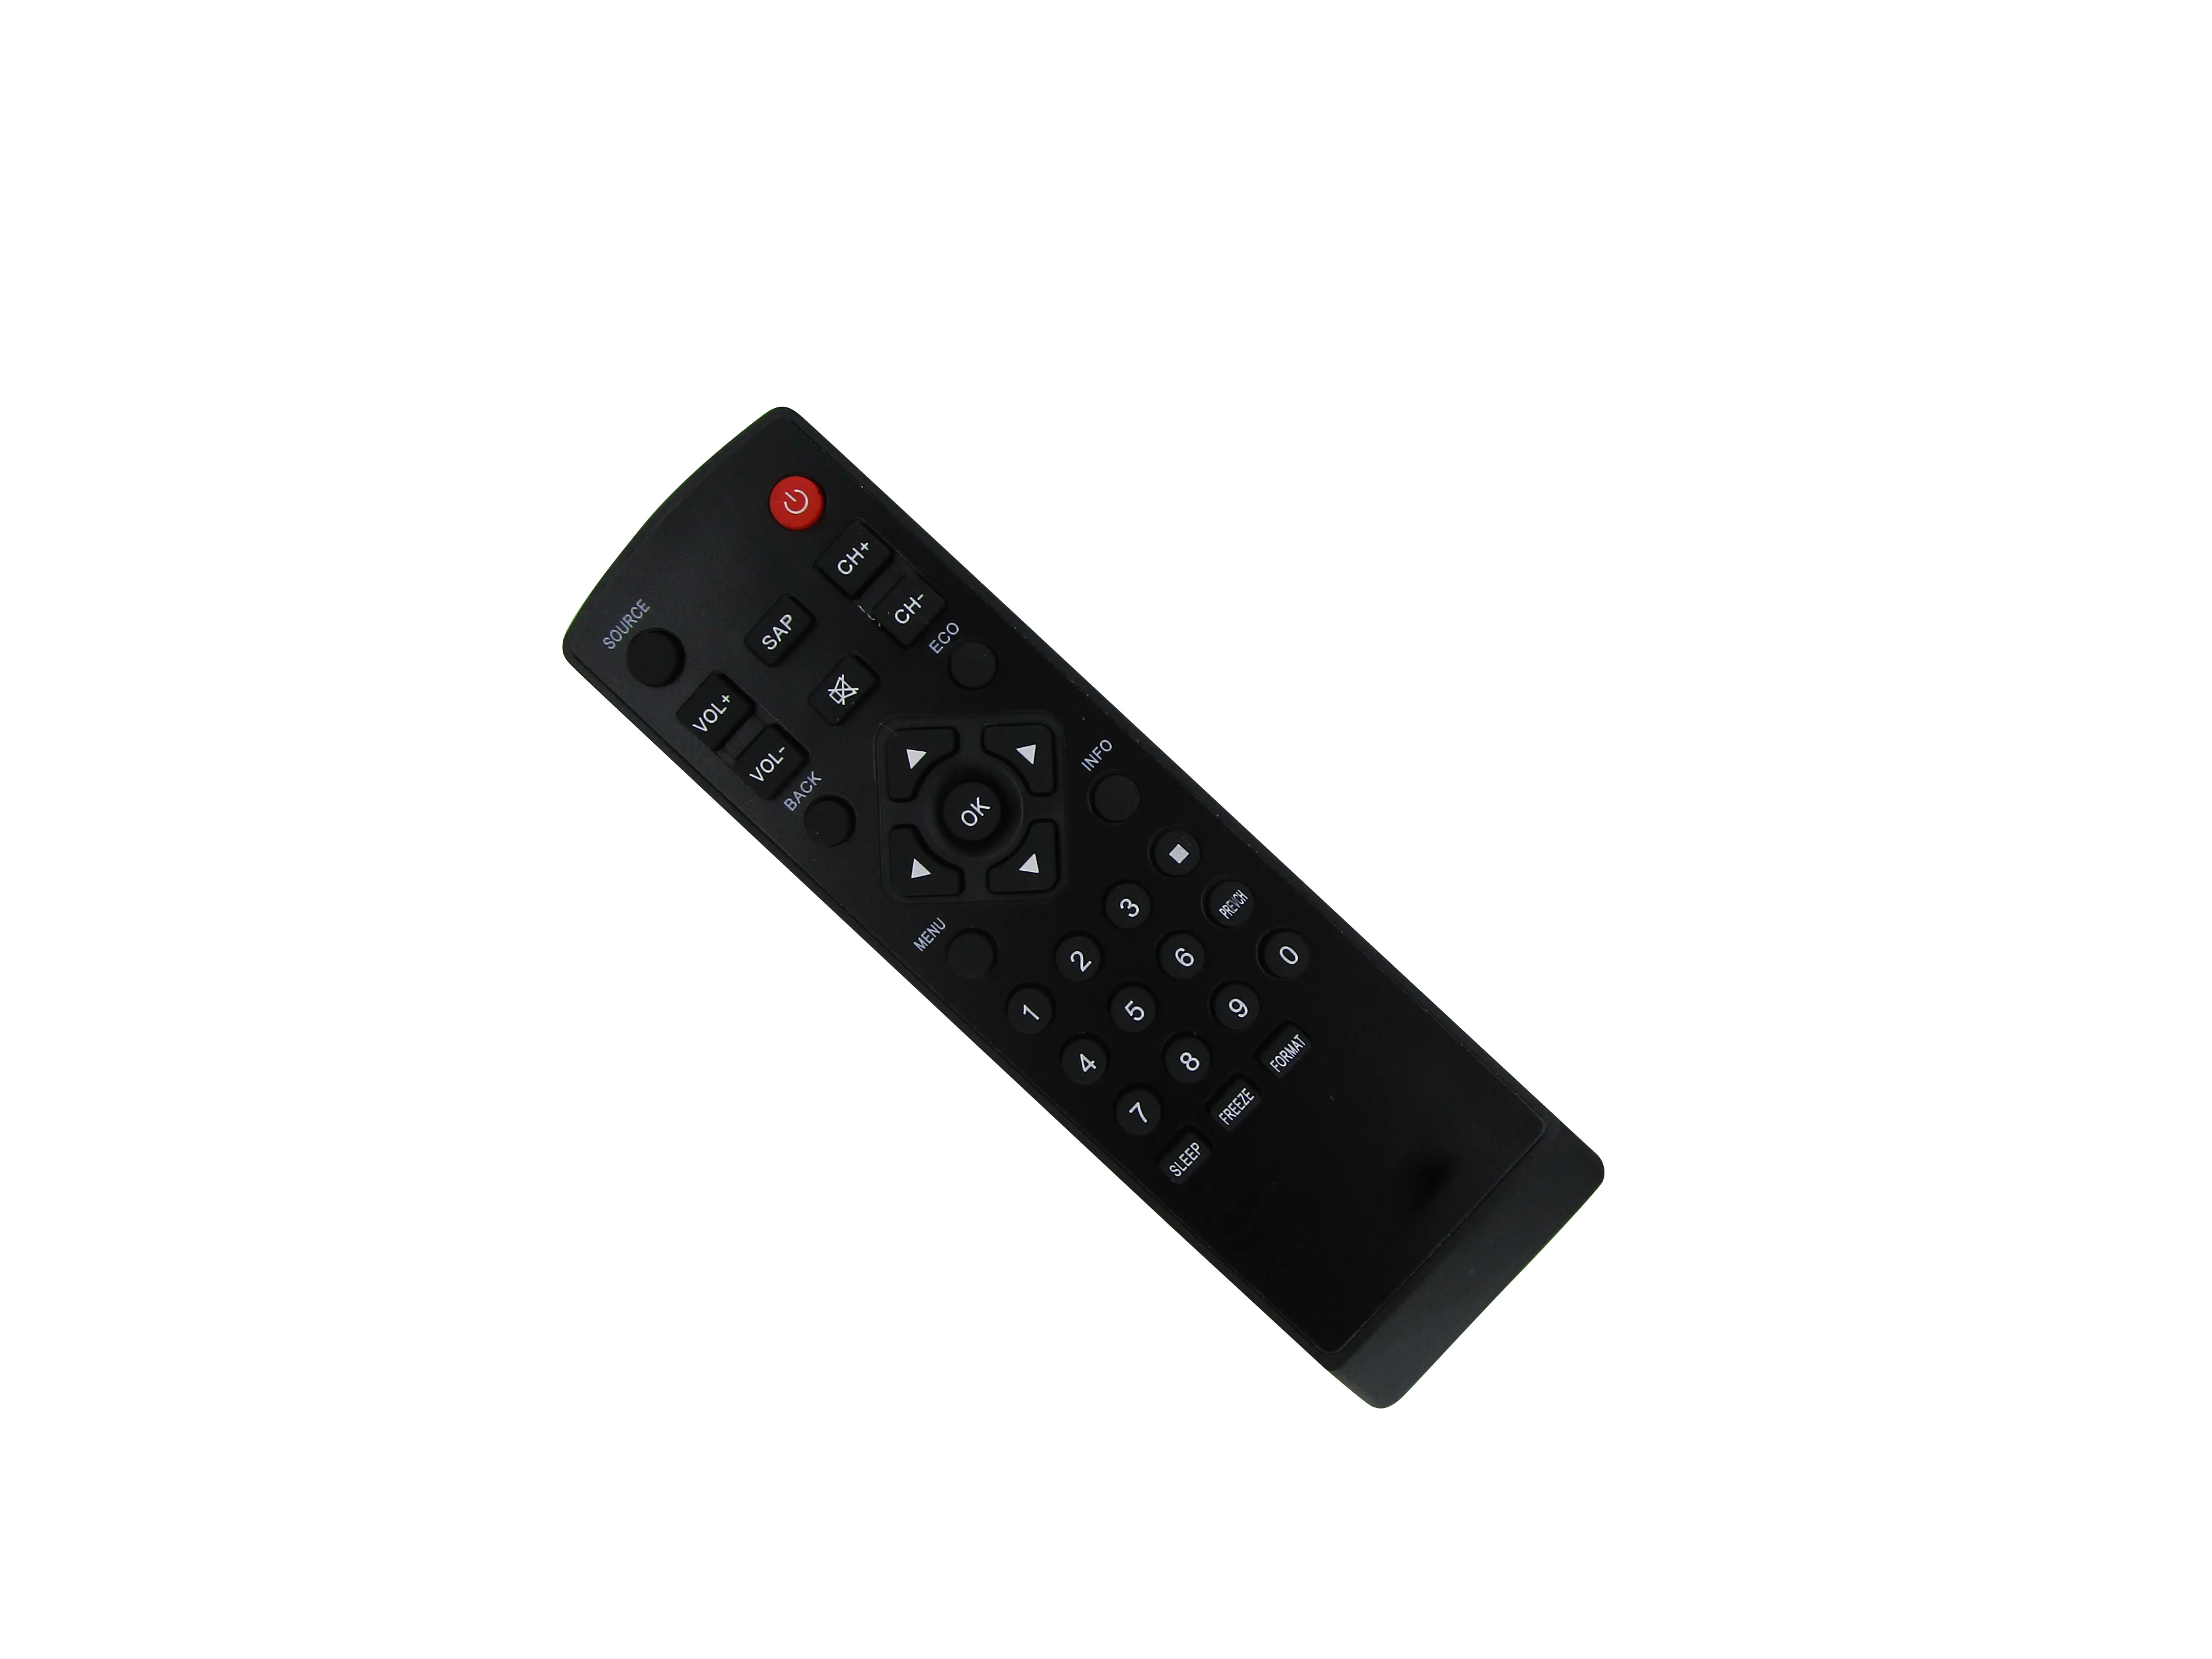 

Remote Control For Dynex NF029UD DX-LCD22-09 DX-LCD32-09 DX-LCD37-09 DX-LCD37-09CA LCD37-09 LED LCD HDTV TV TELEVISION